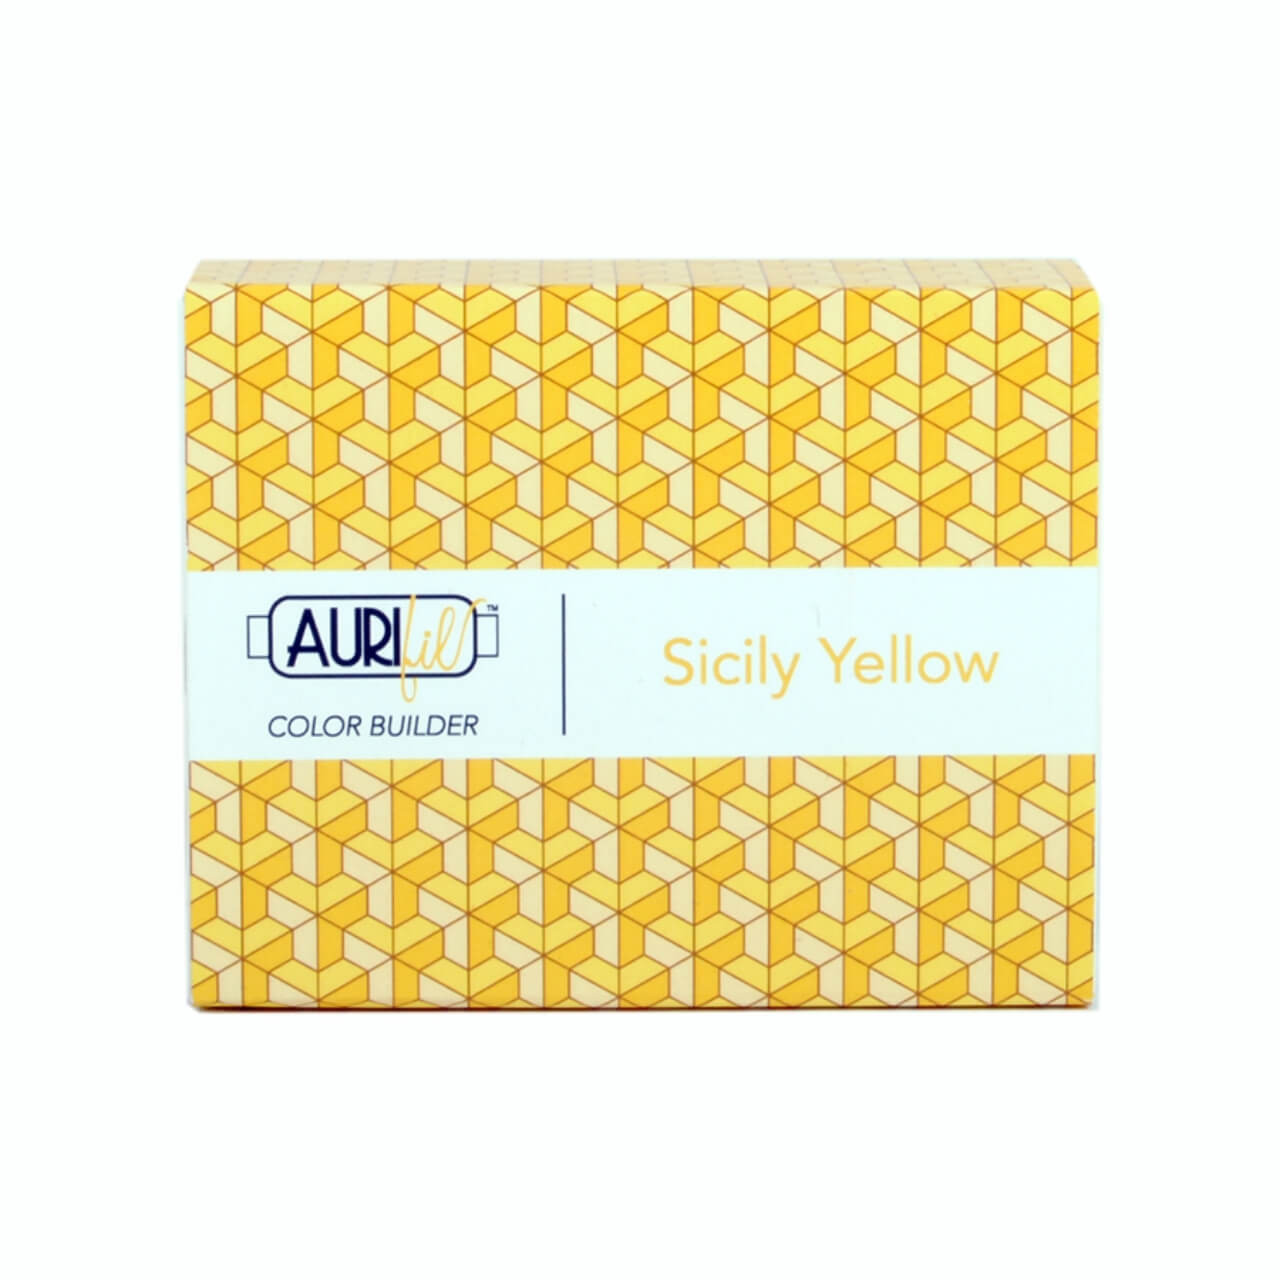 Packaging for Aurifil's Sicily Yellow Color Builder, displaying a vibrant hexagonal pattern in various shades of yellow, complemented by the Aurifil logo and "Sicily Yellow" text on the label.